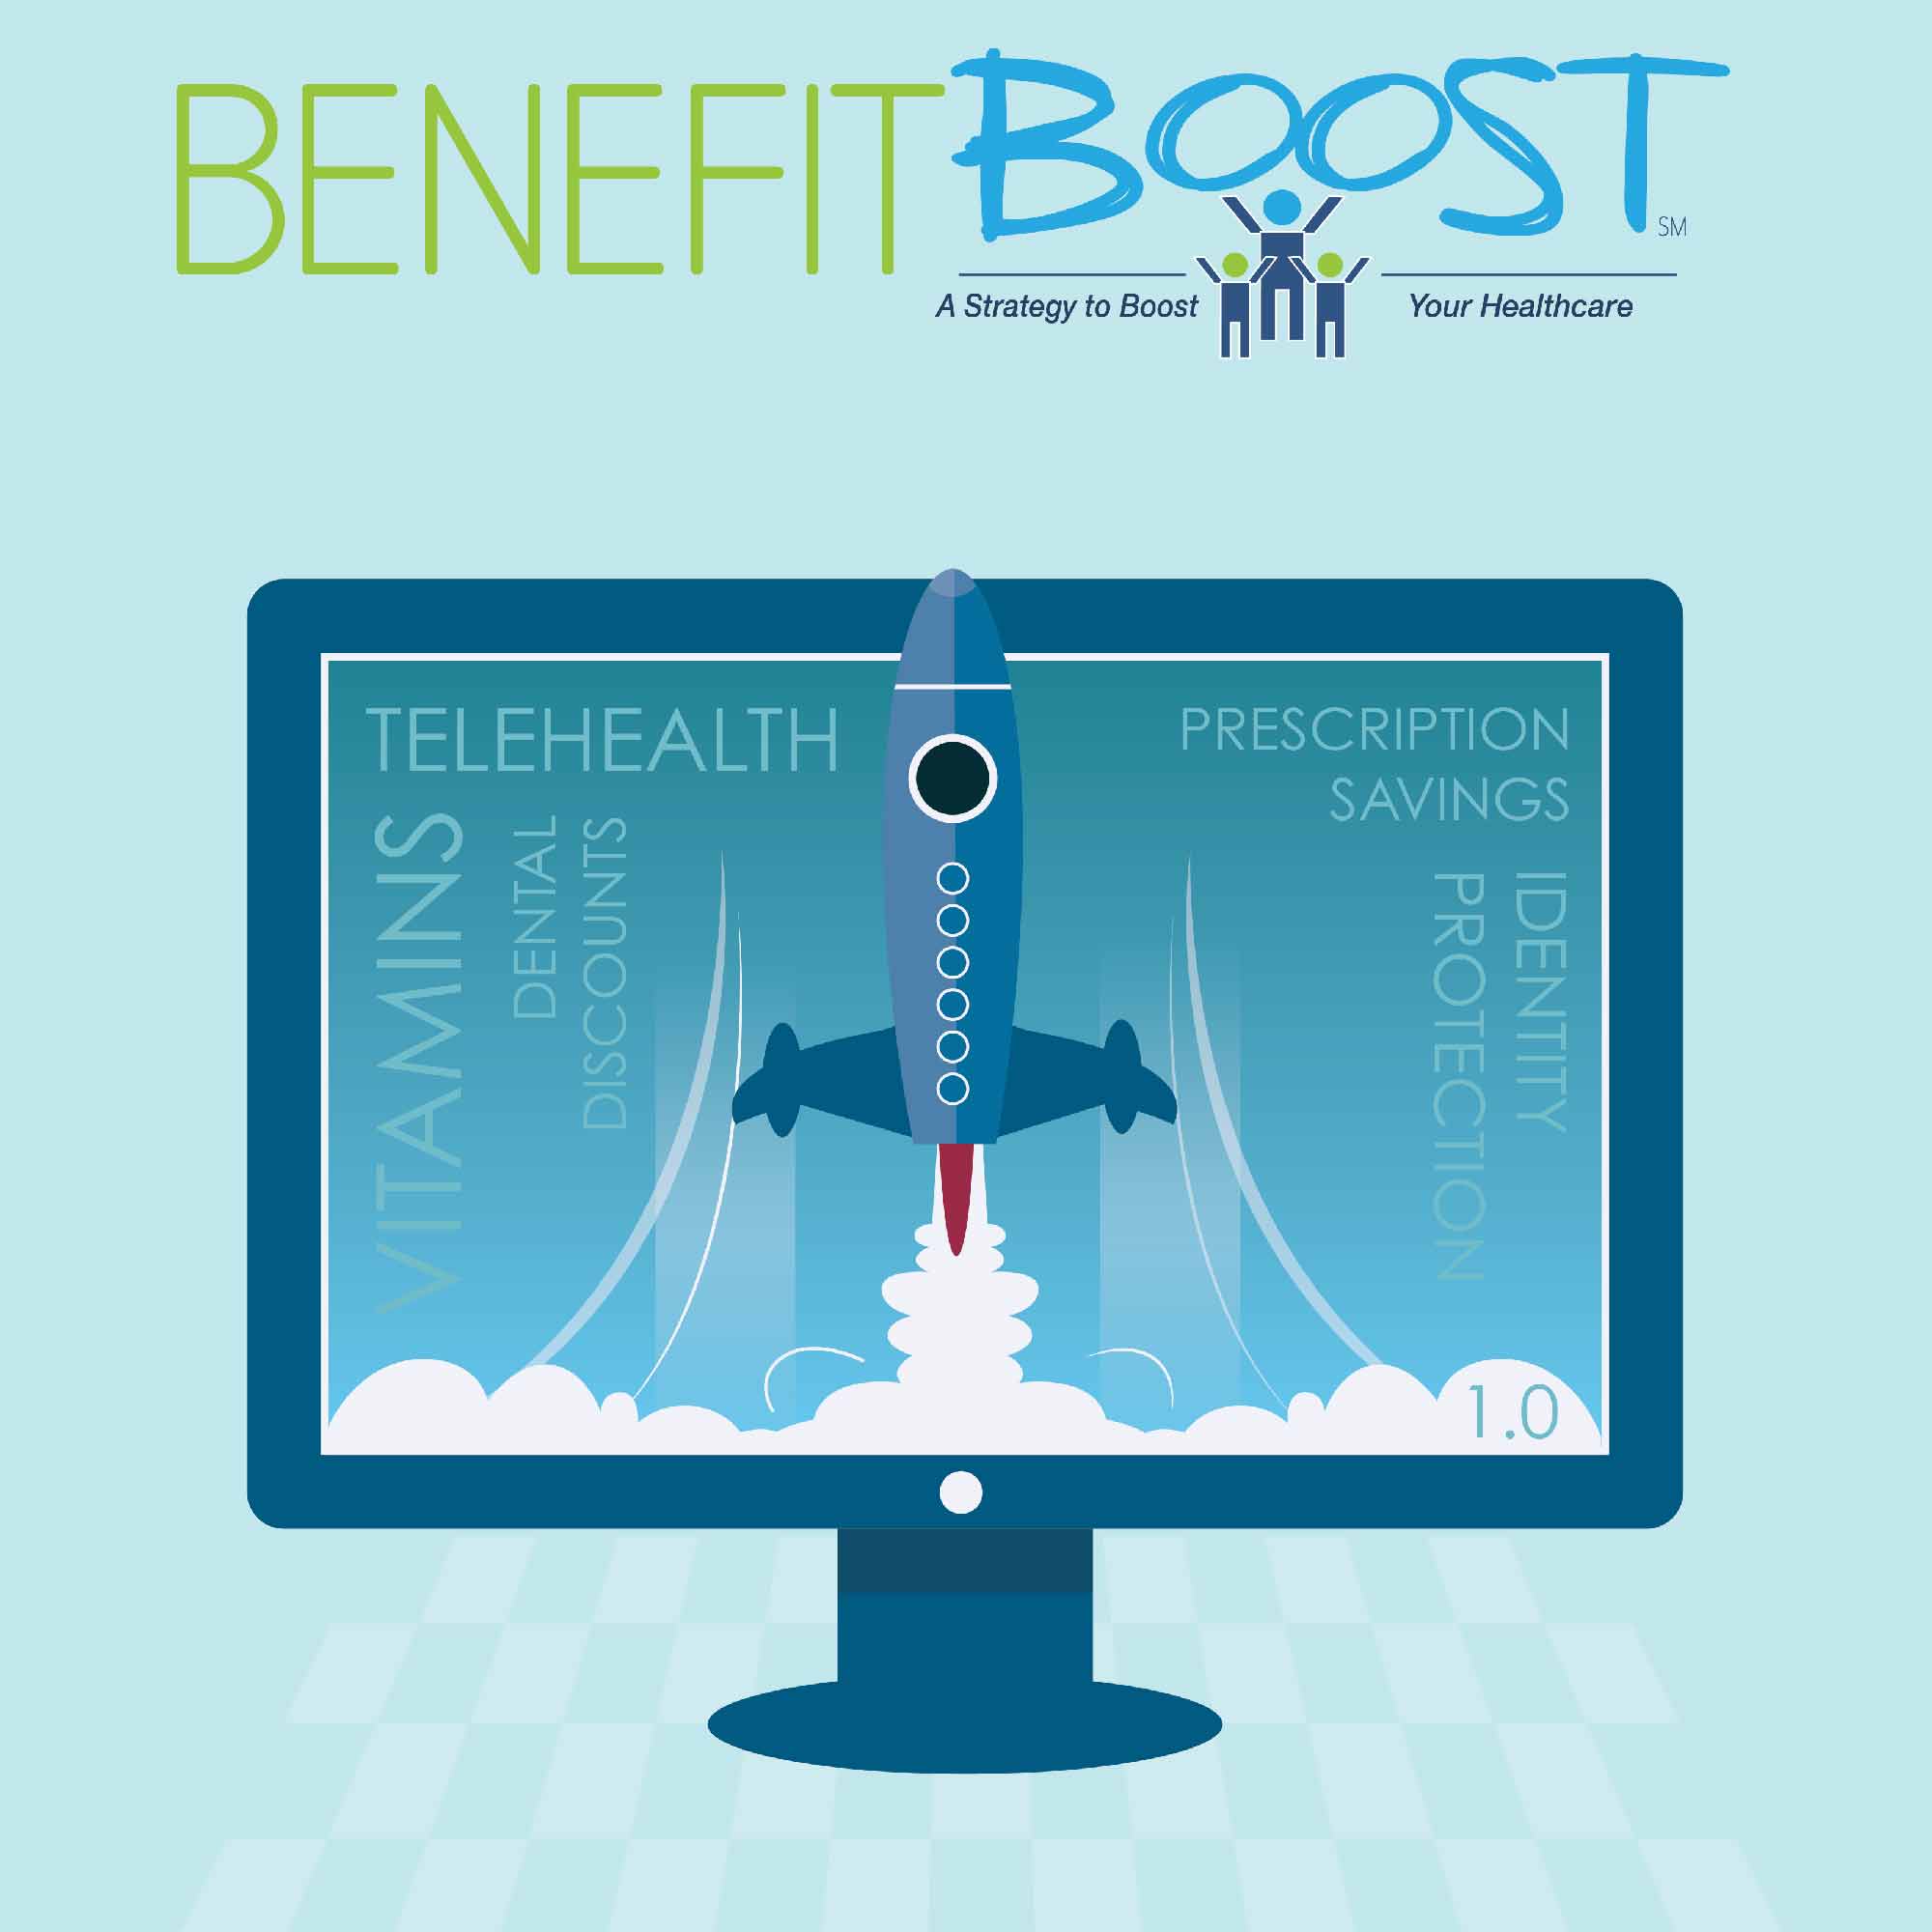 Full Package - Benefit Boost 1.0 Subscription Product